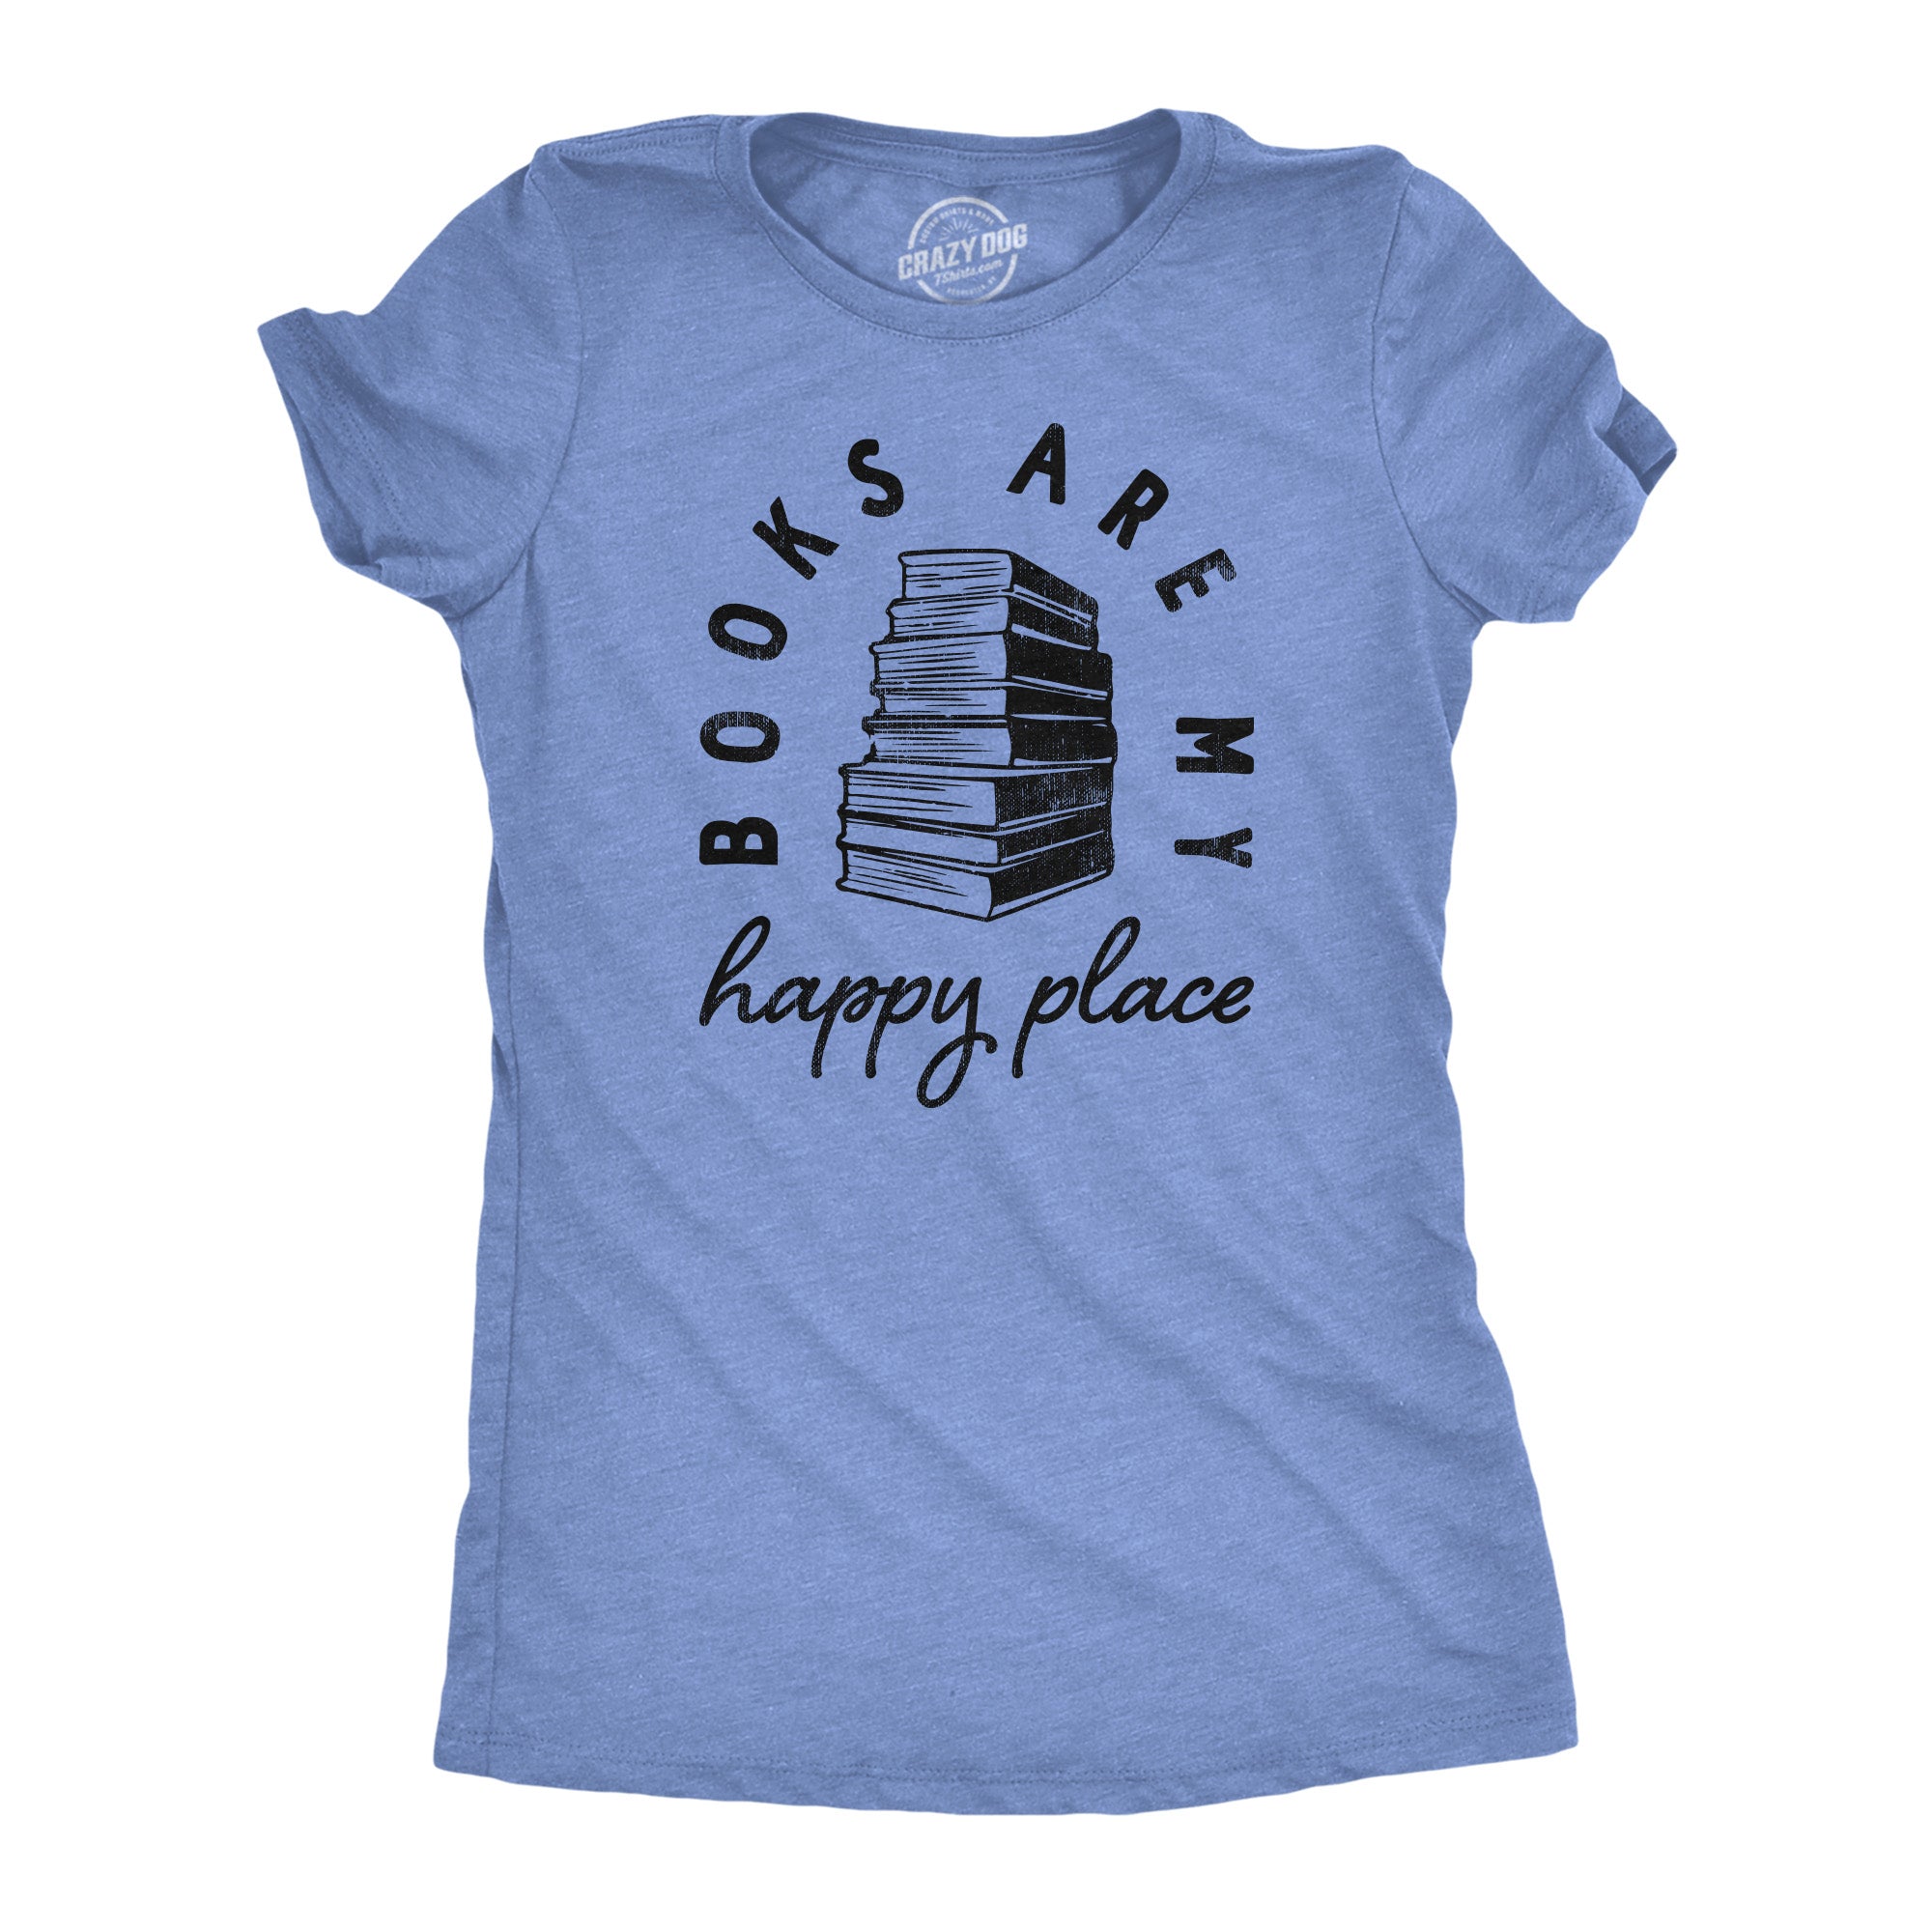 Funny Light Heather Blue - BOOKS Books Are My Happy Place Womens T Shirt Nerdy Nerdy Tee